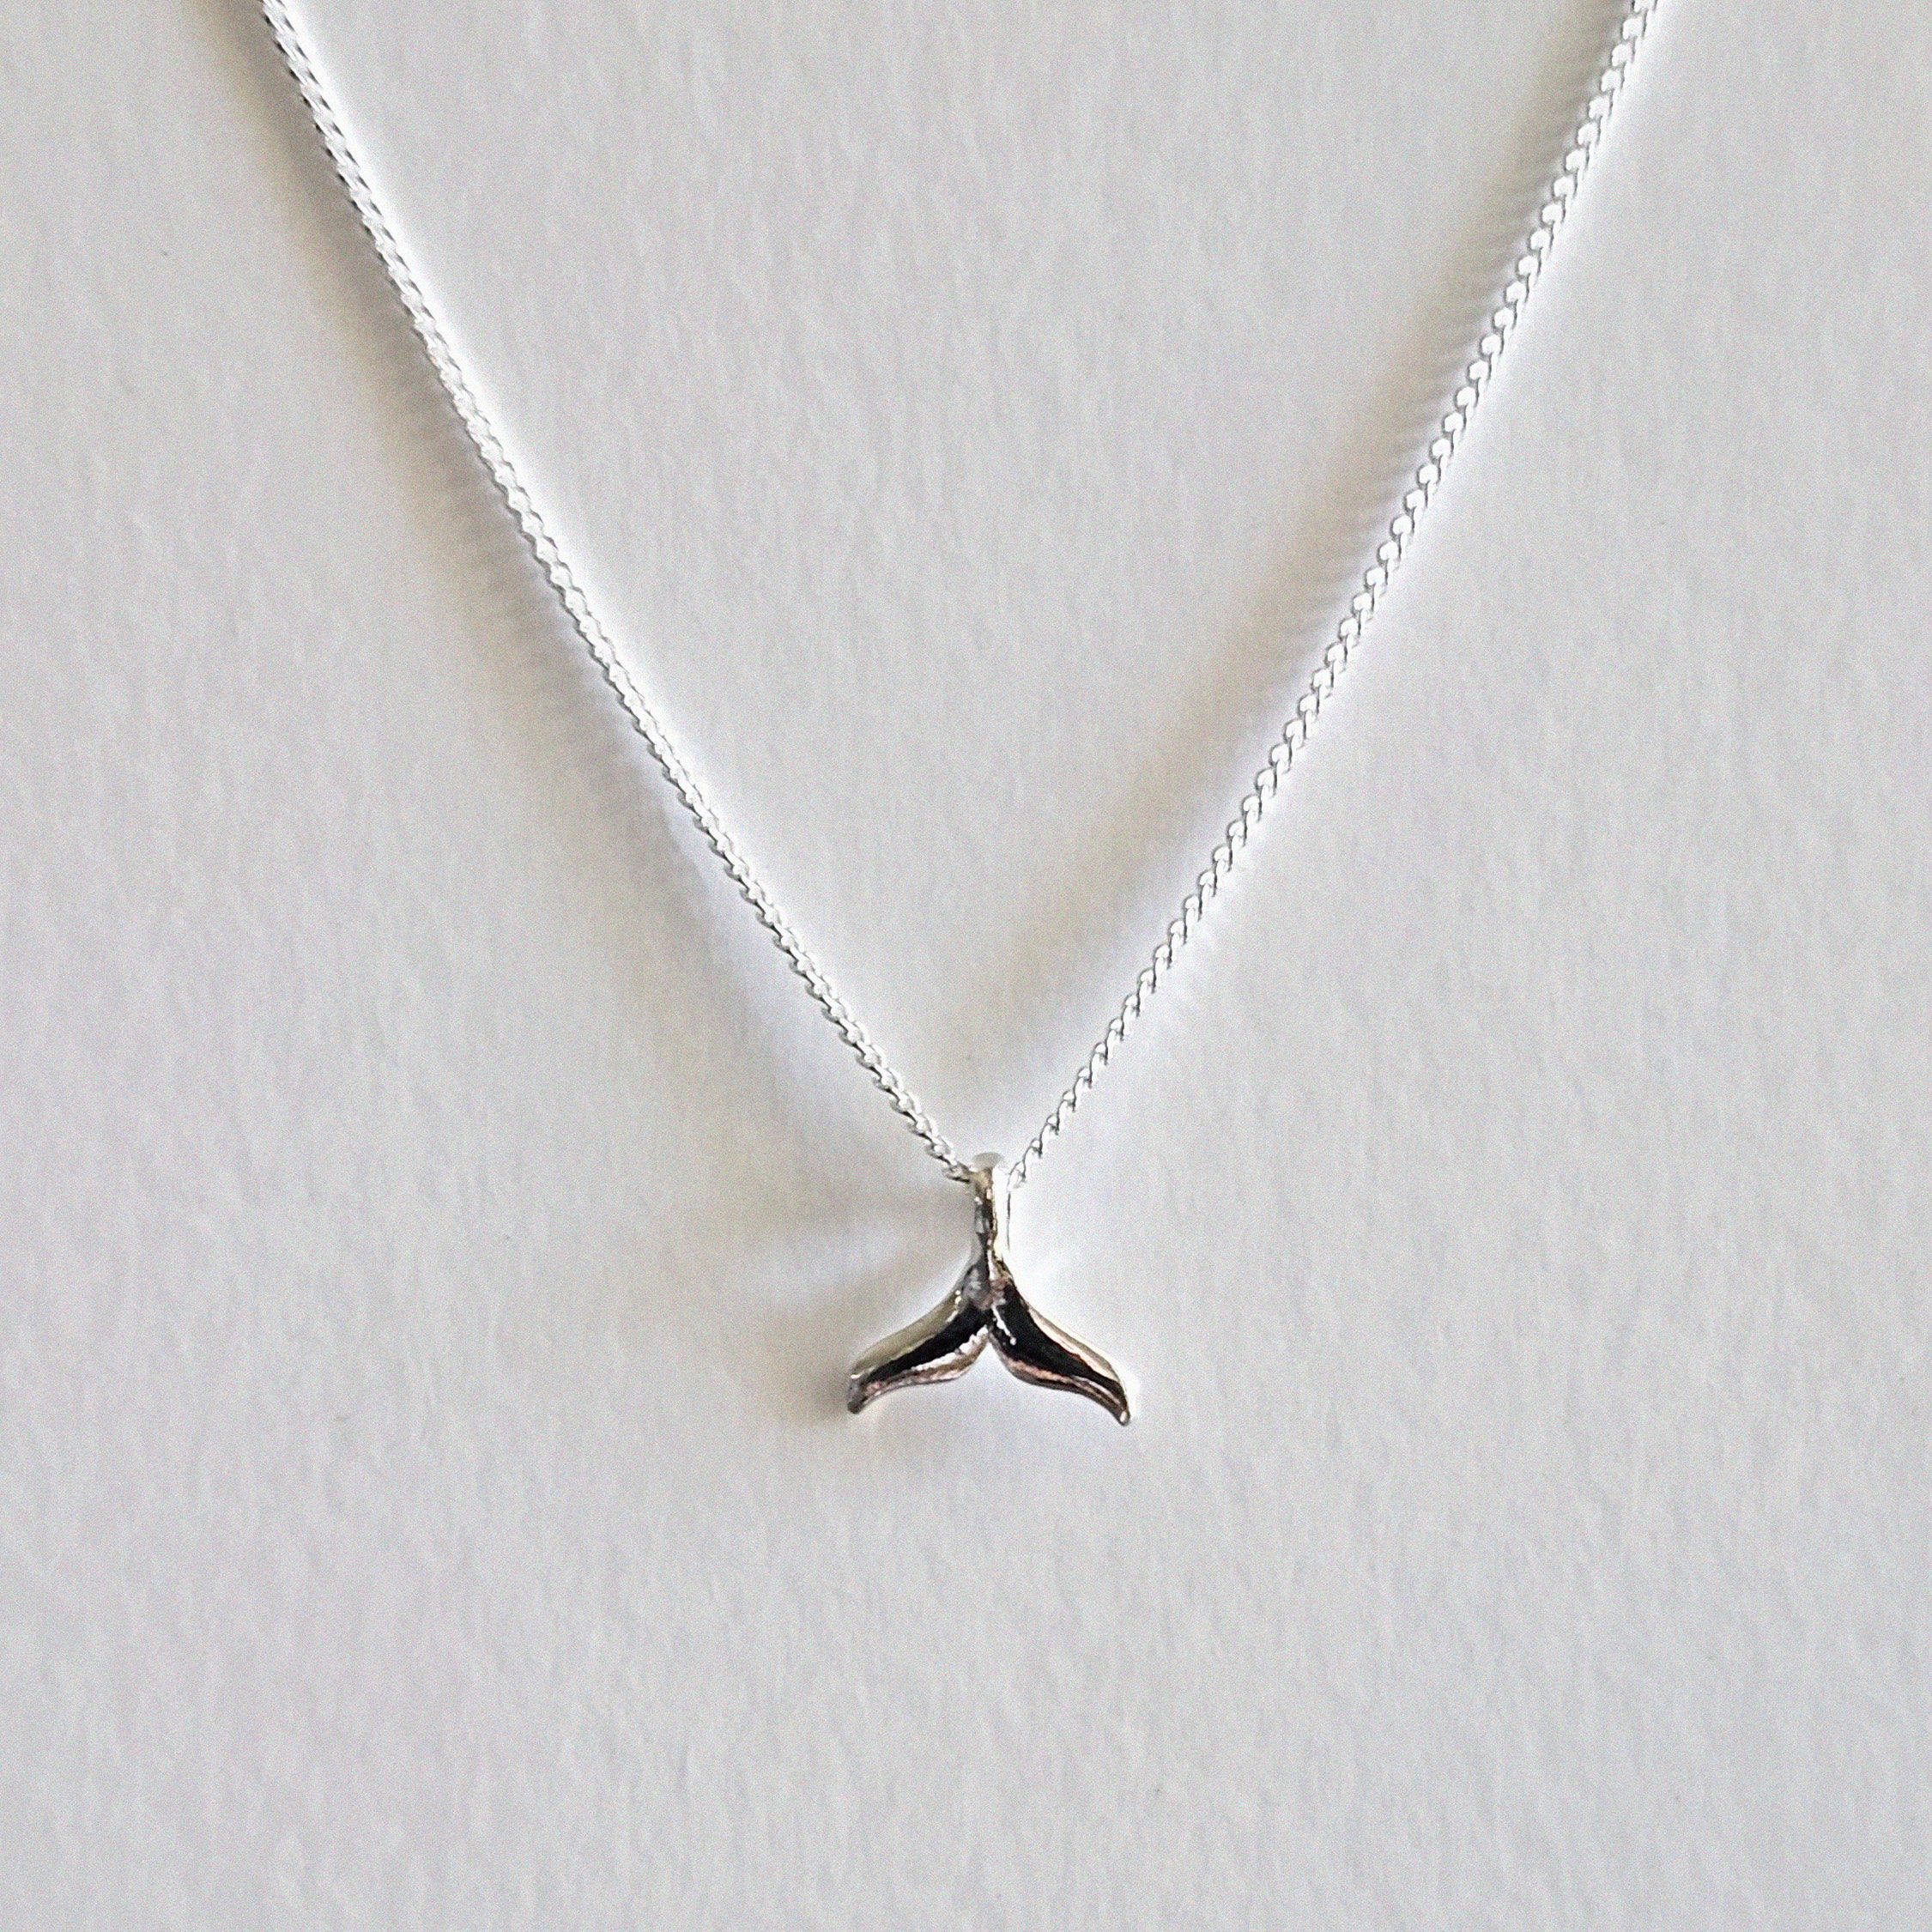 Small Whale Tail Necklace